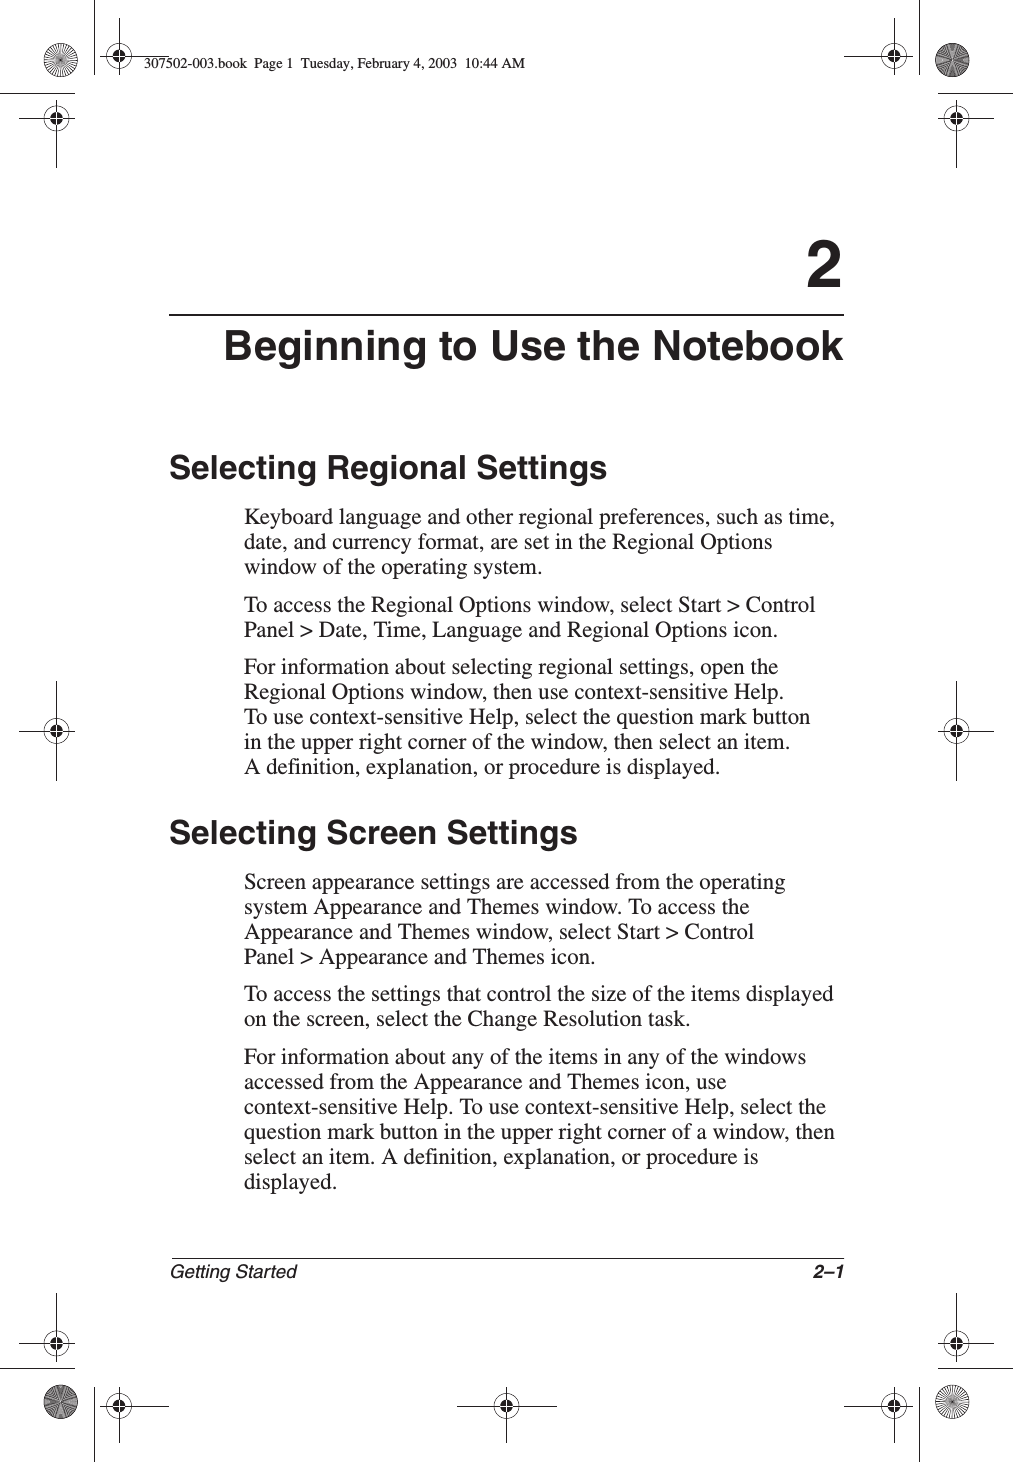 Getting Started 2–12Beginning to Use the NotebookSelecting Regional SettingsKeyboard language and other regional preferences, such as time, date, and currency format, are set in the Regional Options window of the operating system.To access the Regional Options window, select Start &gt; Control Panel &gt; Date, Time, Language and Regional Options icon.For information about selecting regional settings, open the Regional Options window, then use context-sensitive Help. To use context-sensitive Help, select the question mark button in the upper right corner of the window, then select an item. A definition, explanation, or procedure is displayed.Selecting Screen SettingsScreen appearance settings are accessed from the operating system Appearance and Themes window. To access the Appearance and Themes window, select Start &gt; Control Panel &gt; Appearance and Themes icon.To access the settings that control the size of the items displayed on the screen, select the Change Resolution task.For information about any of the items in any of the windows accessed from the Appearance and Themes icon, use context-sensitive Help. To use context-sensitive Help, select the question mark button in the upper right corner of a window, then select an item. A definition, explanation, or procedure is displayed.307502-003.book  Page 1  Tuesday, February 4, 2003  10:44 AM